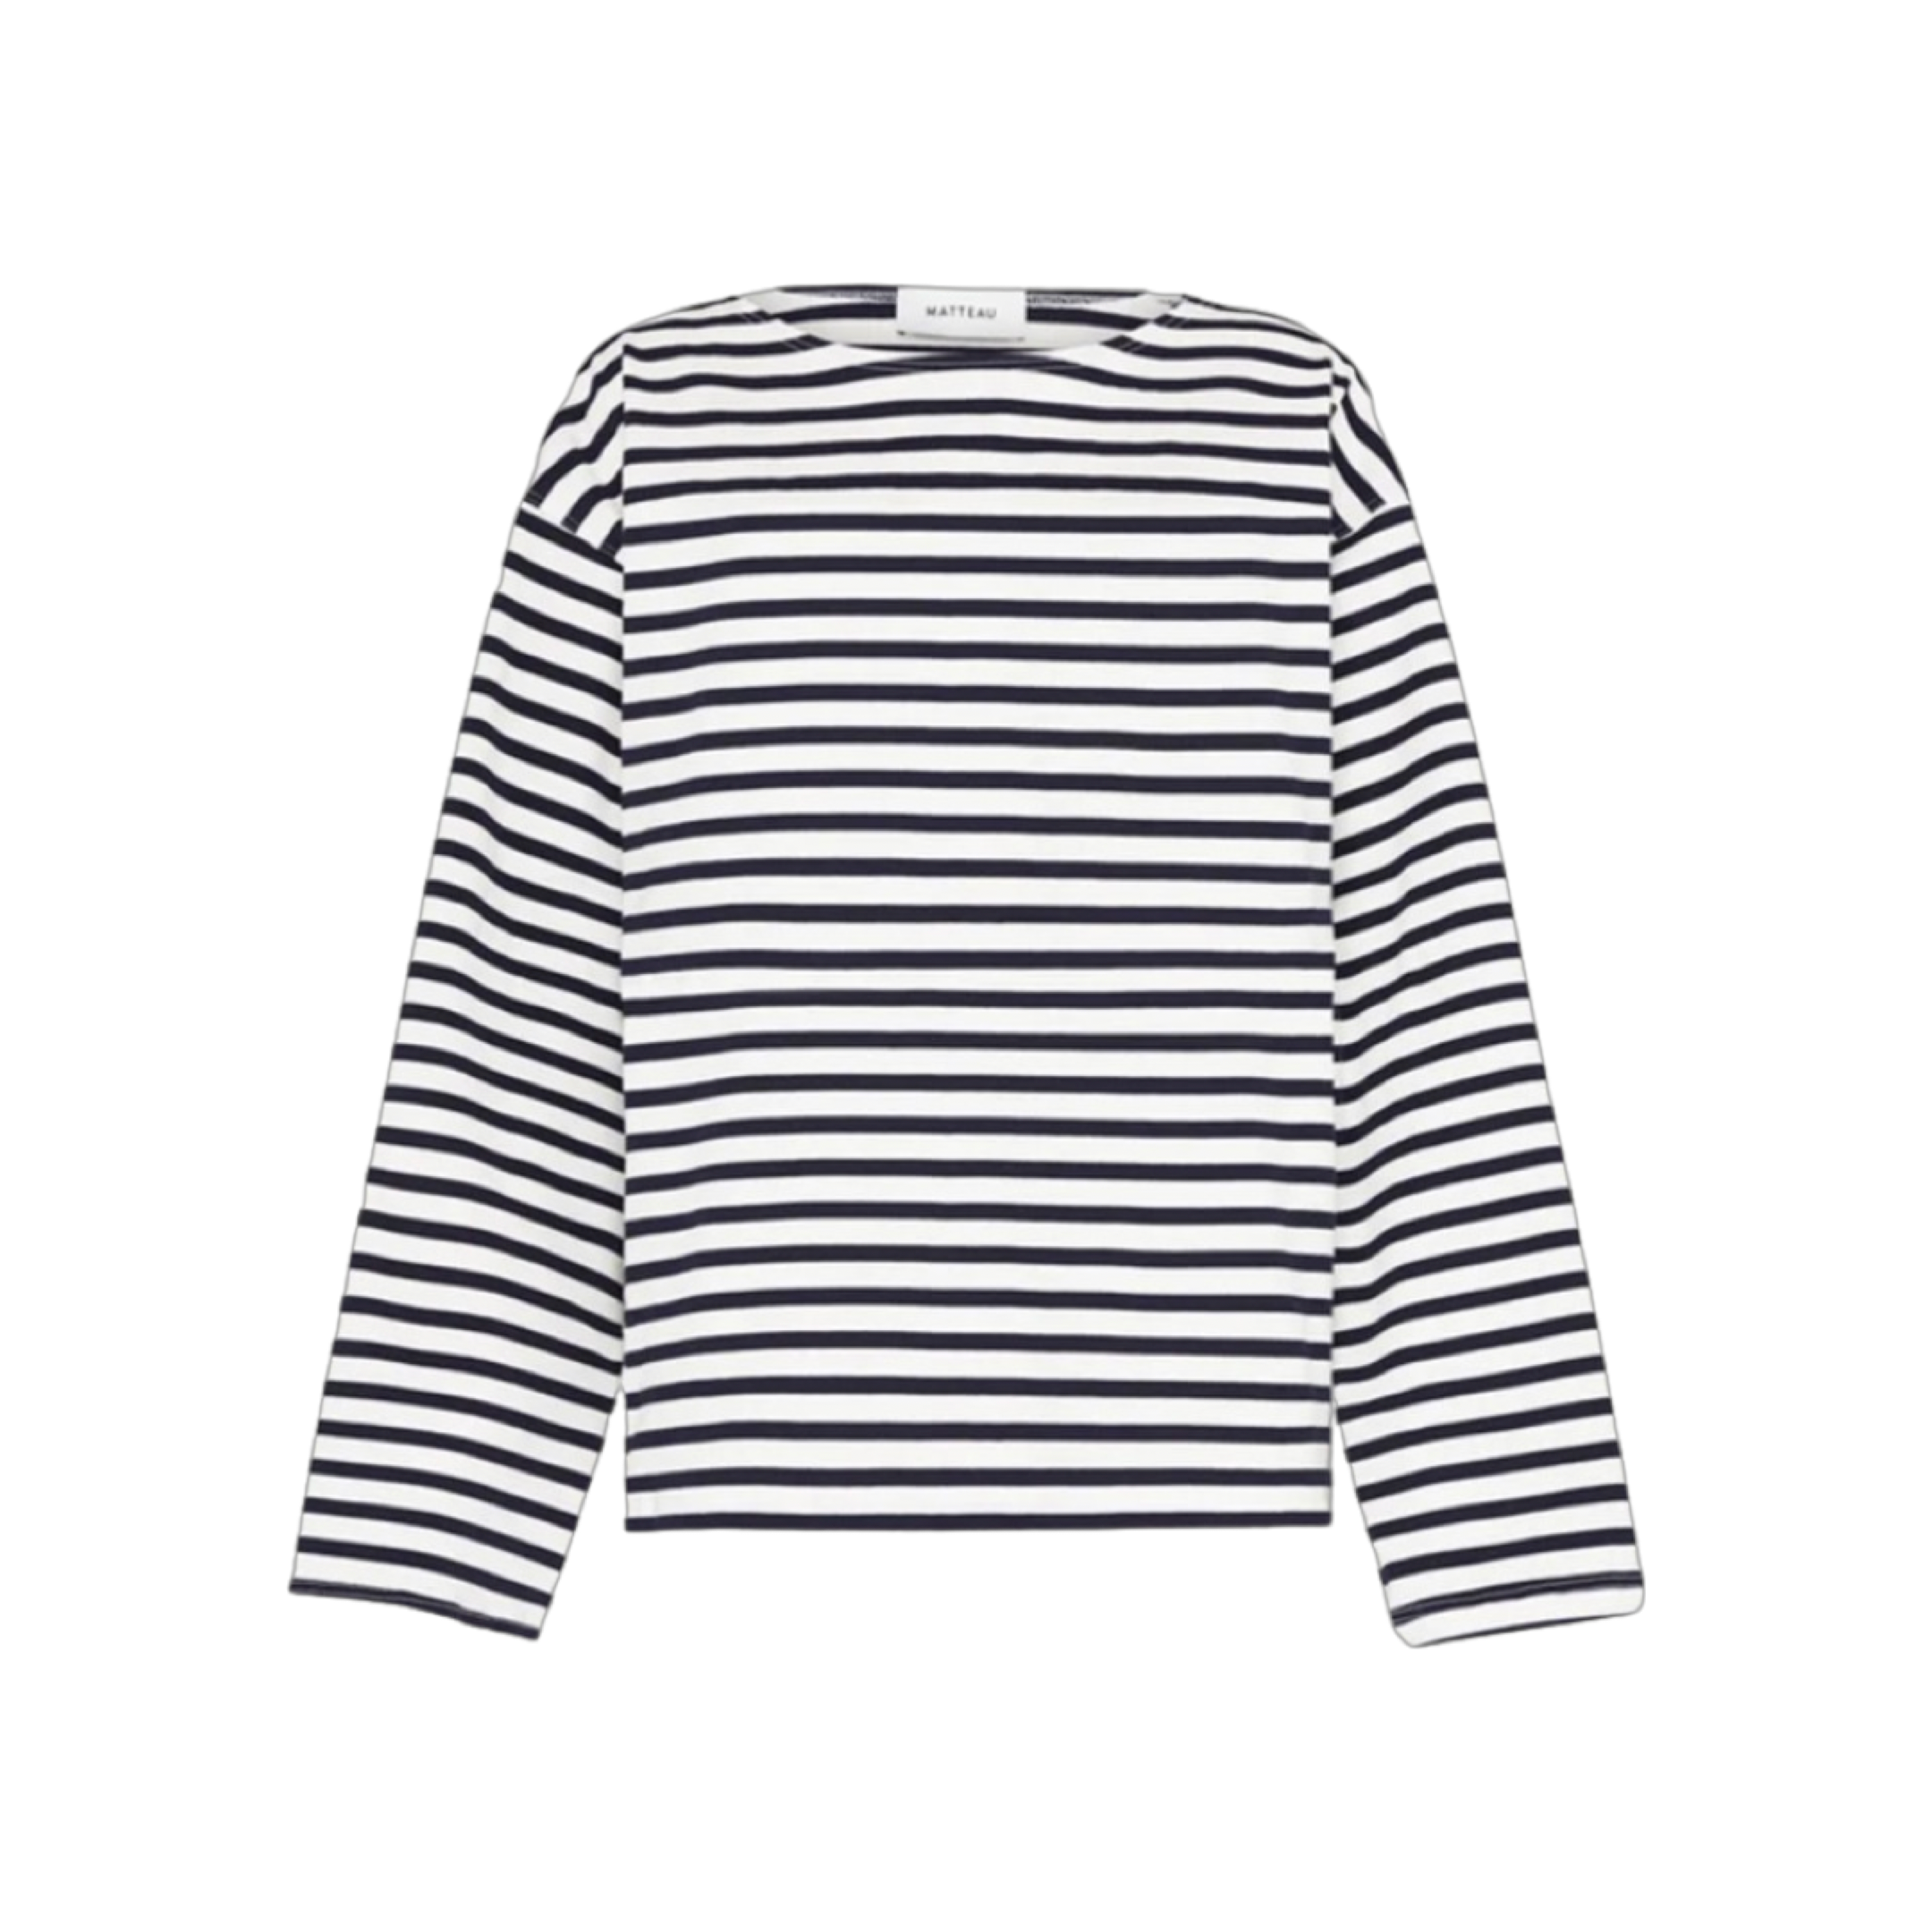 Striped Cotton-Jersey Top